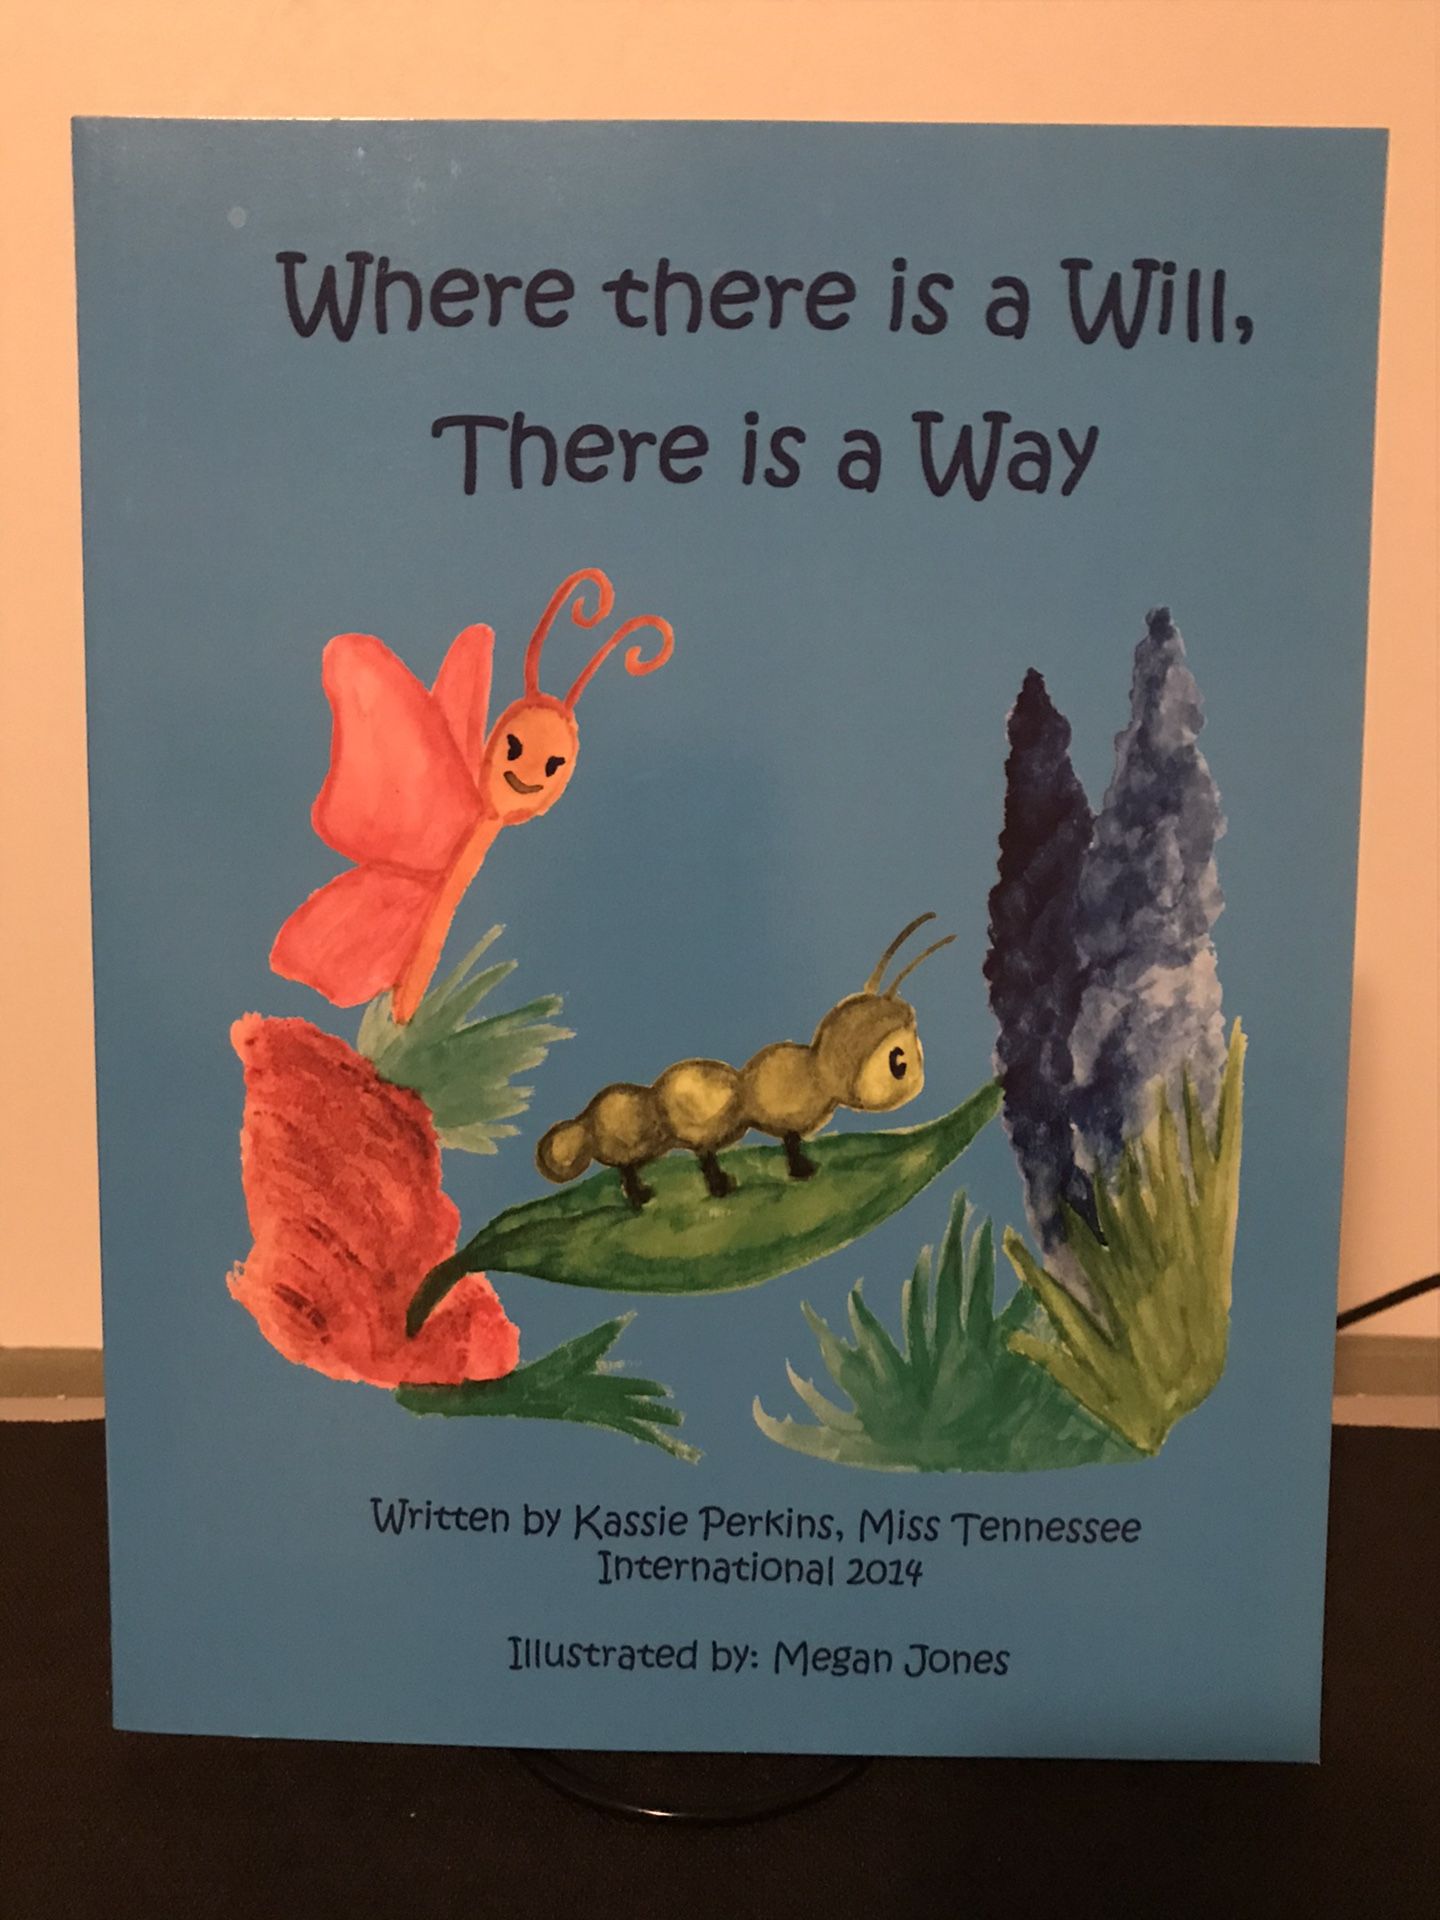 Where There is a Way, There is a Way by Kassie Perkins, Miss Tennessee - Signed Book